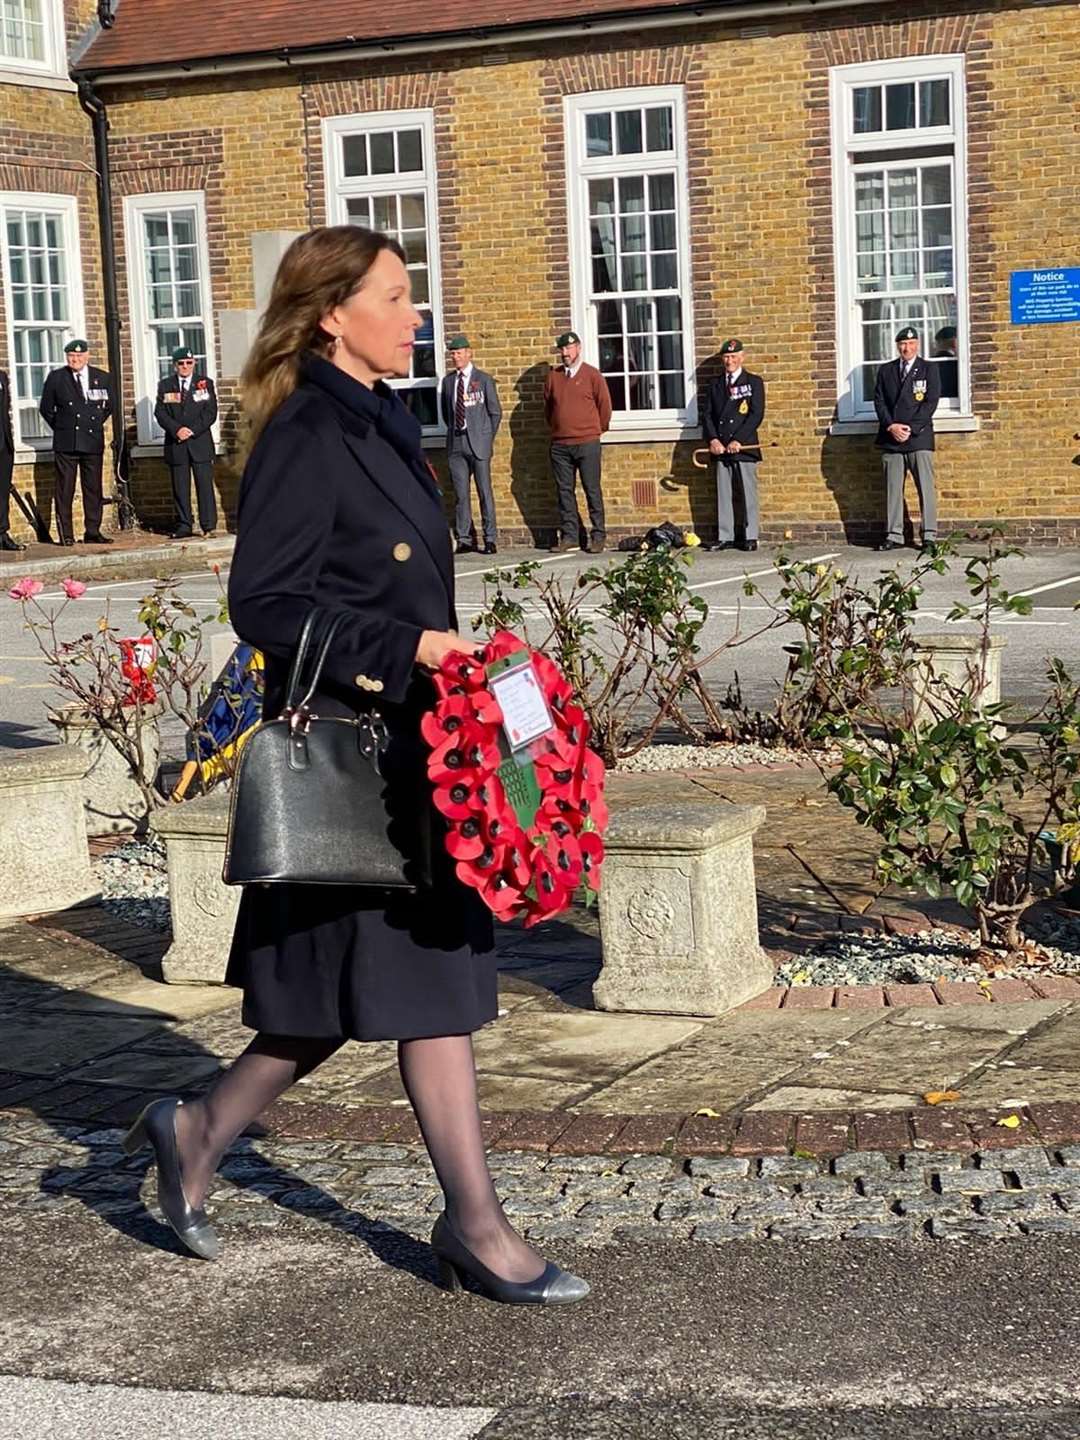 MP for Deal and Dover, Natalie Elphicke, lays a wreath at the scaled back event in Deal